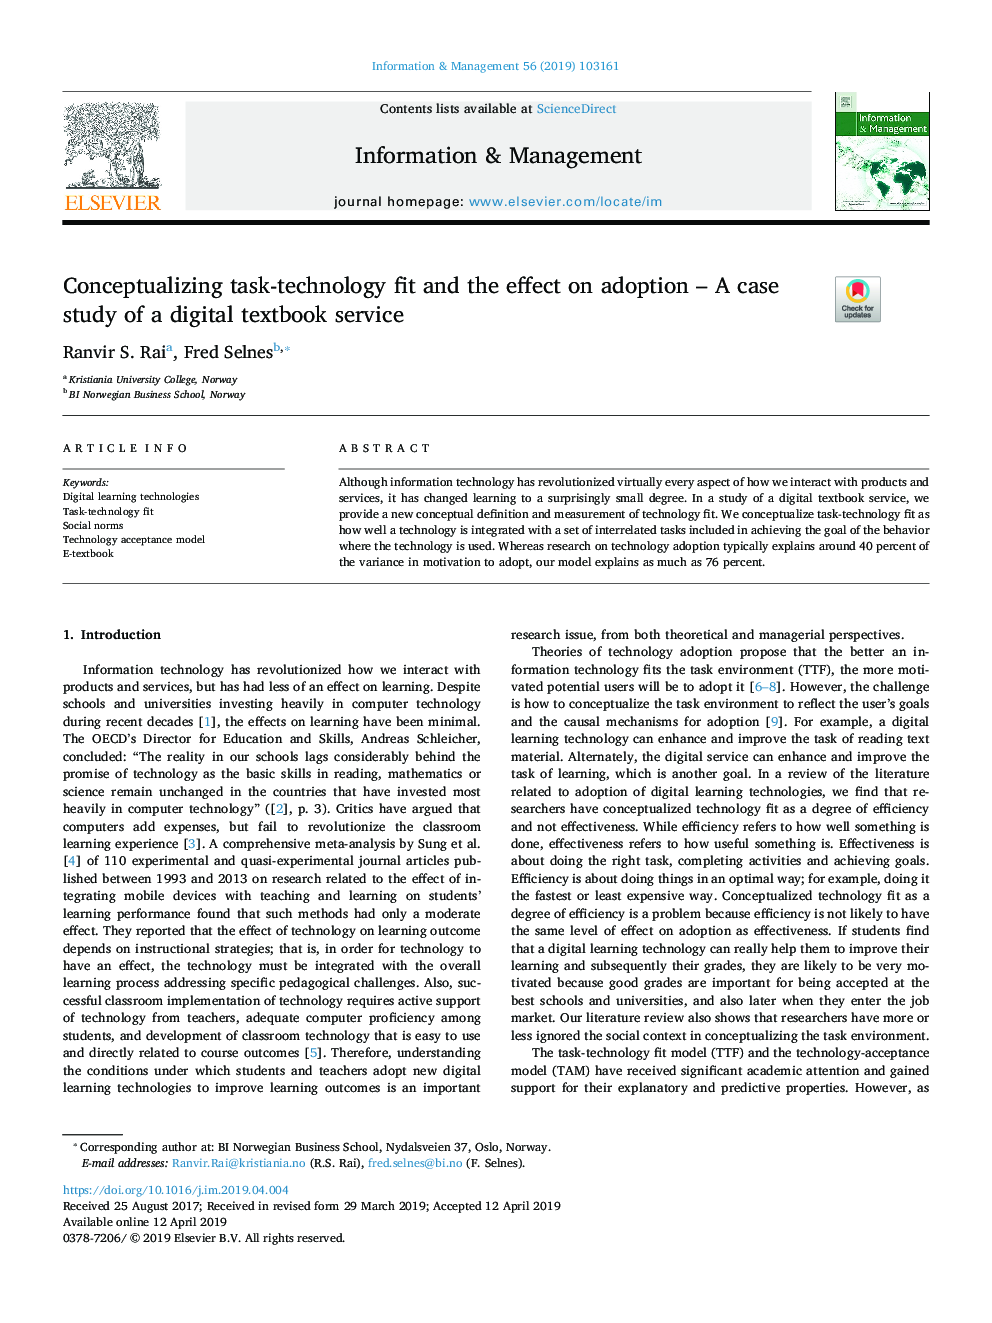 Conceptualizing task-technology fit and the effect on adoption - A case study of a digital textbook service